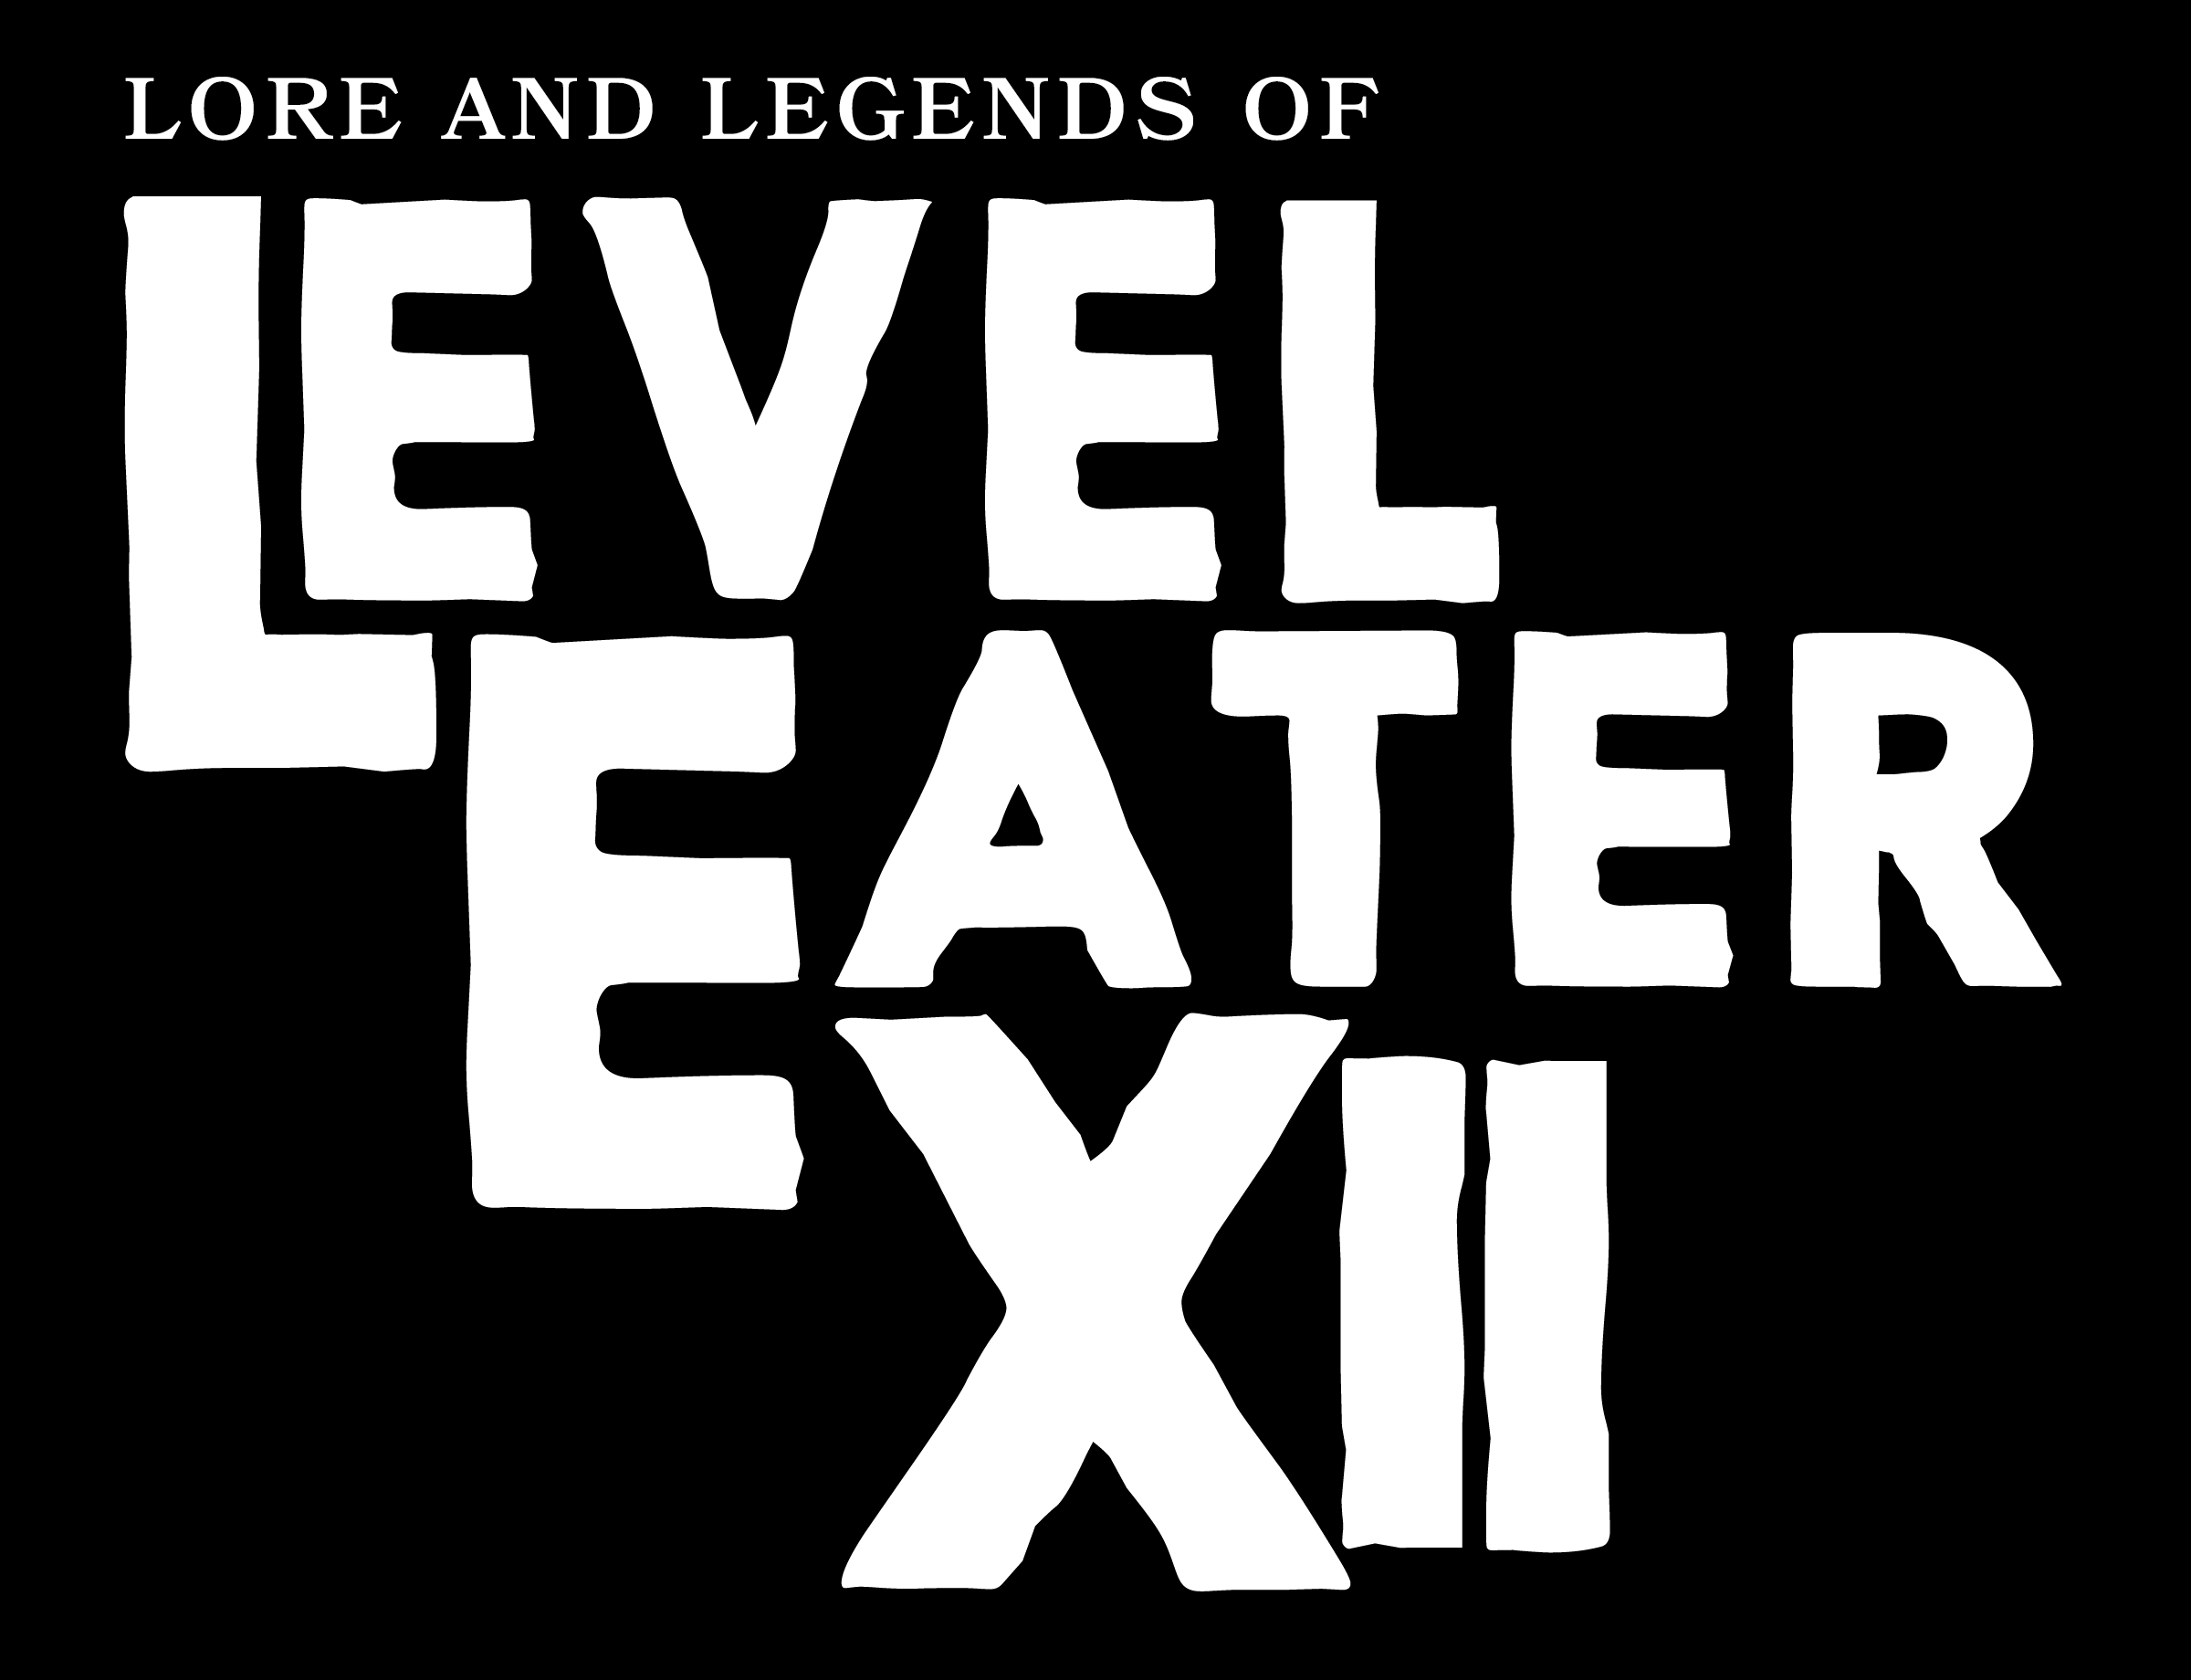 Lore and Legends of Level Eater XII